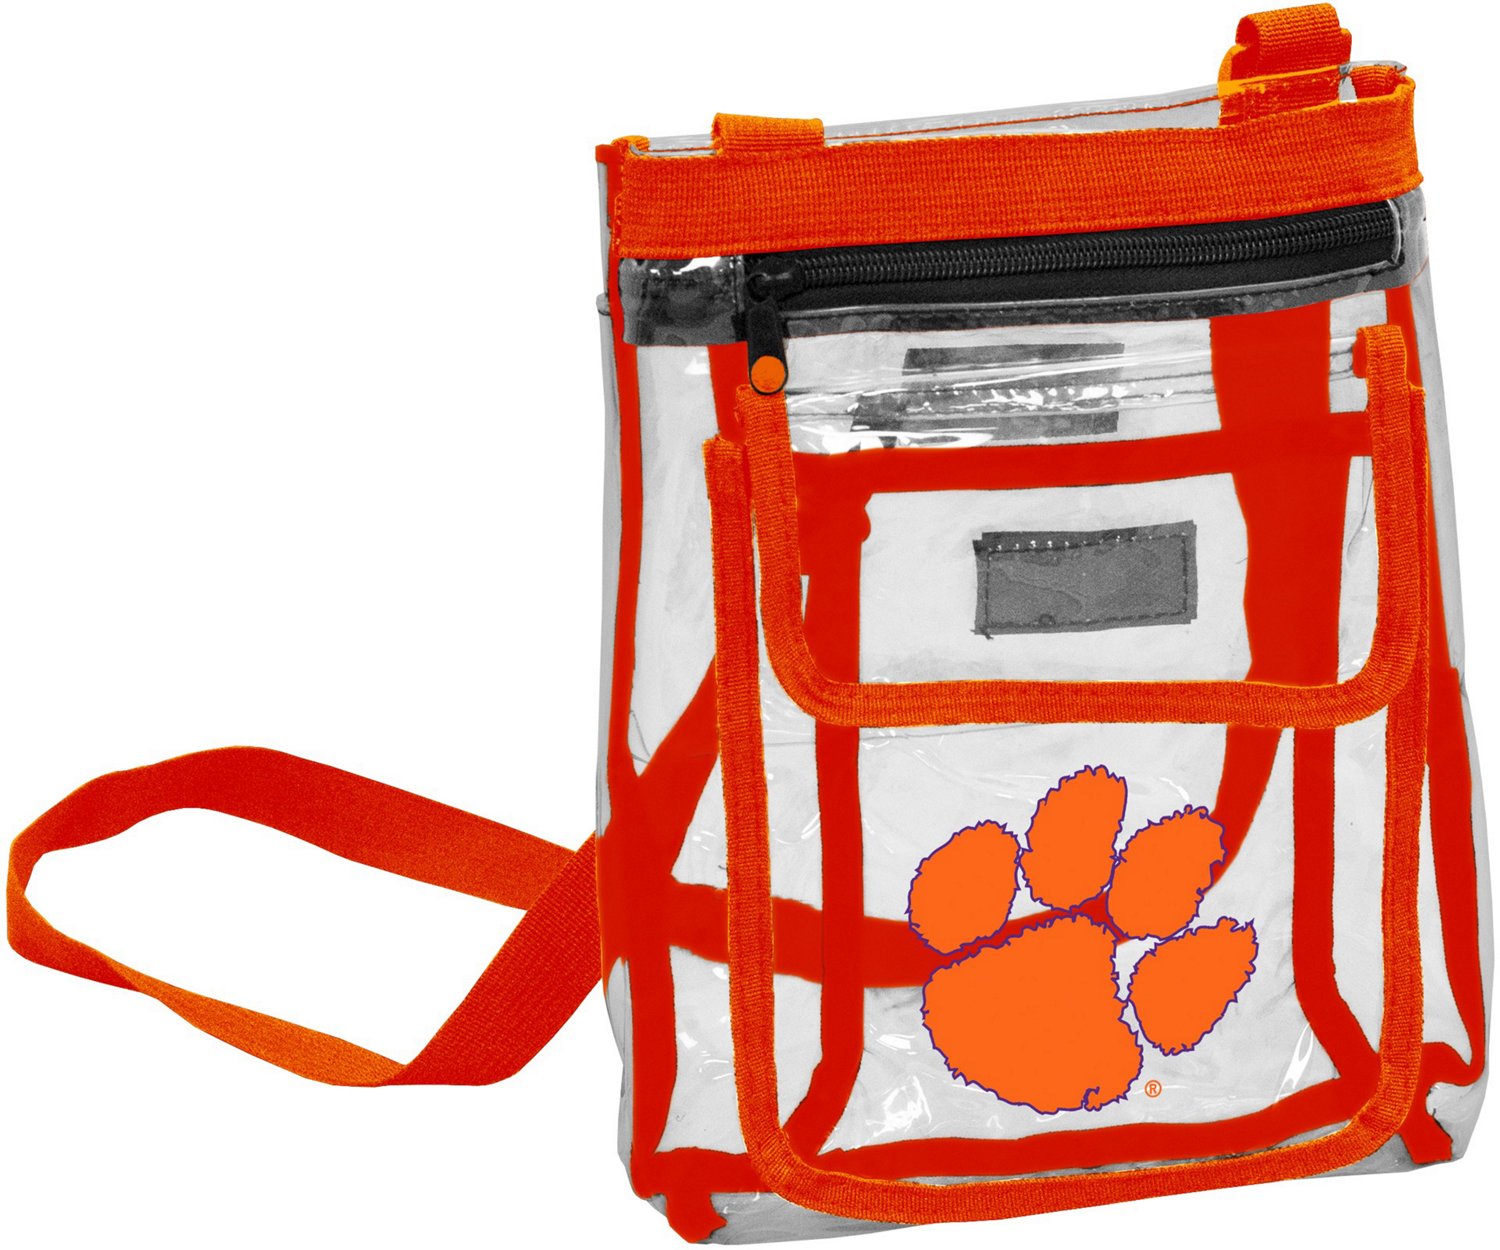 Black Out and clear bags when UofL takes on Clemson